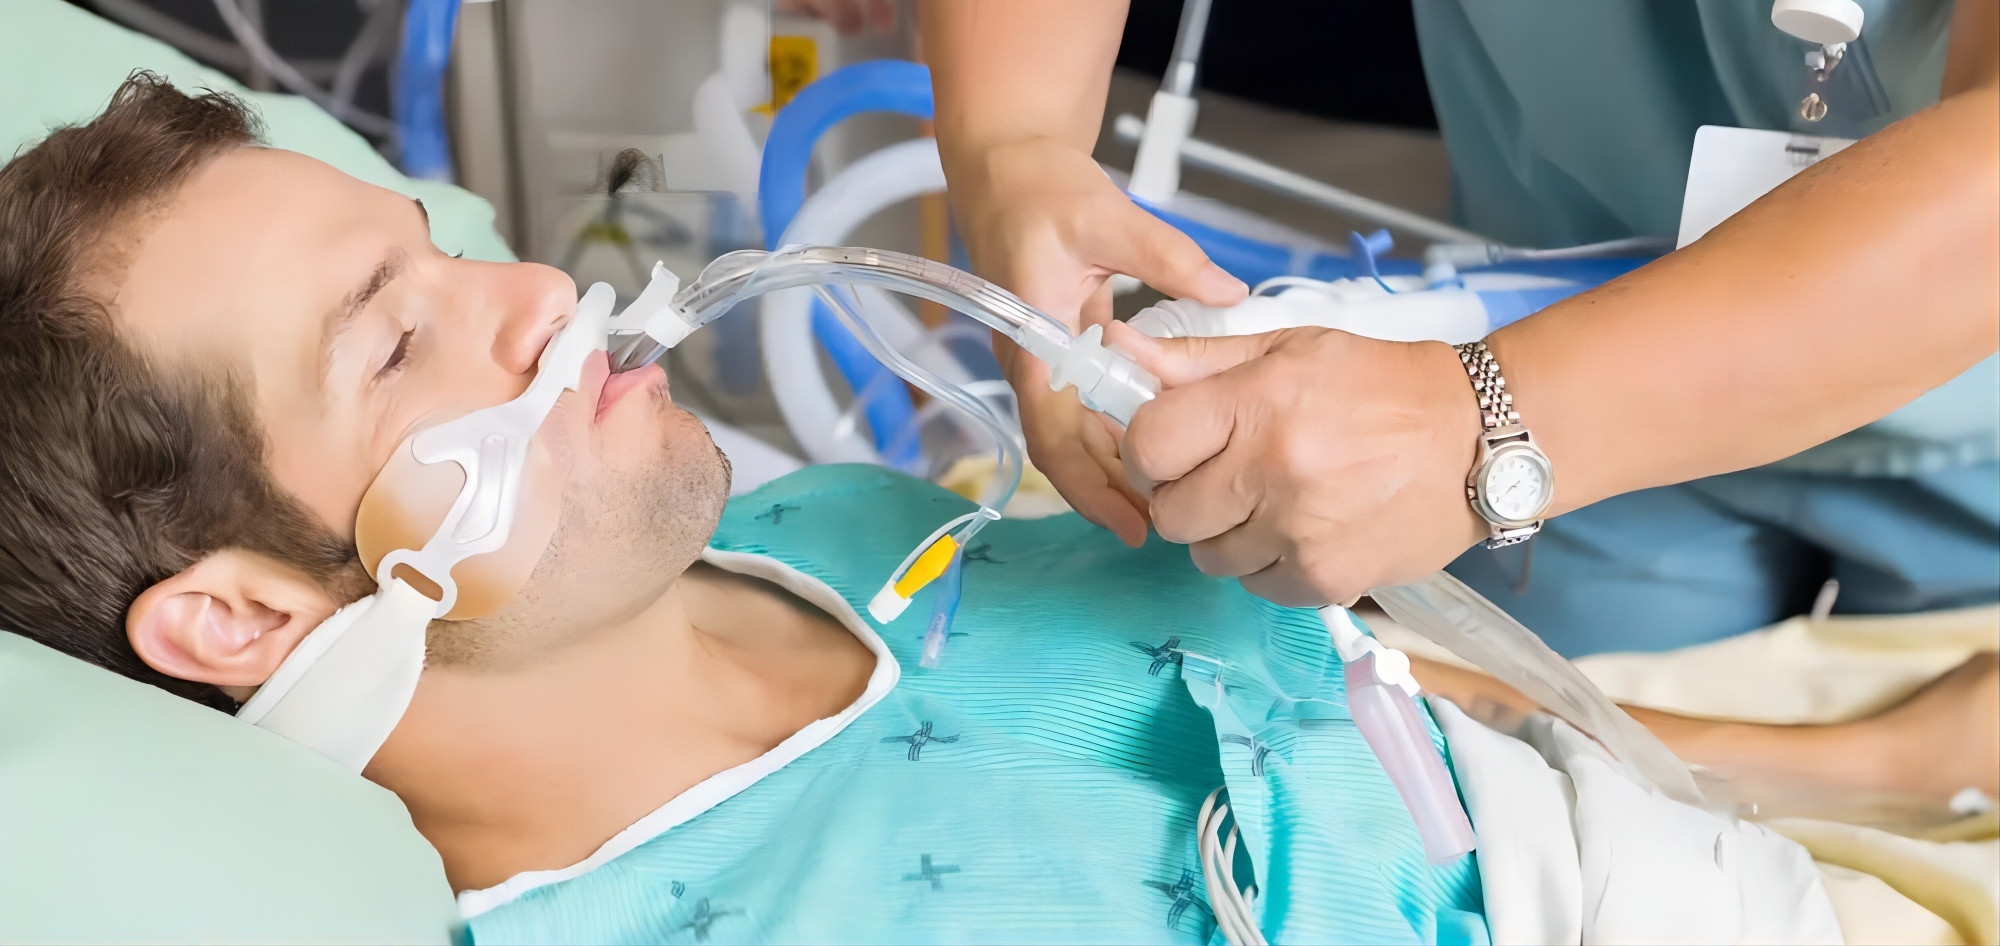 Why Do We Need A Ventilator?